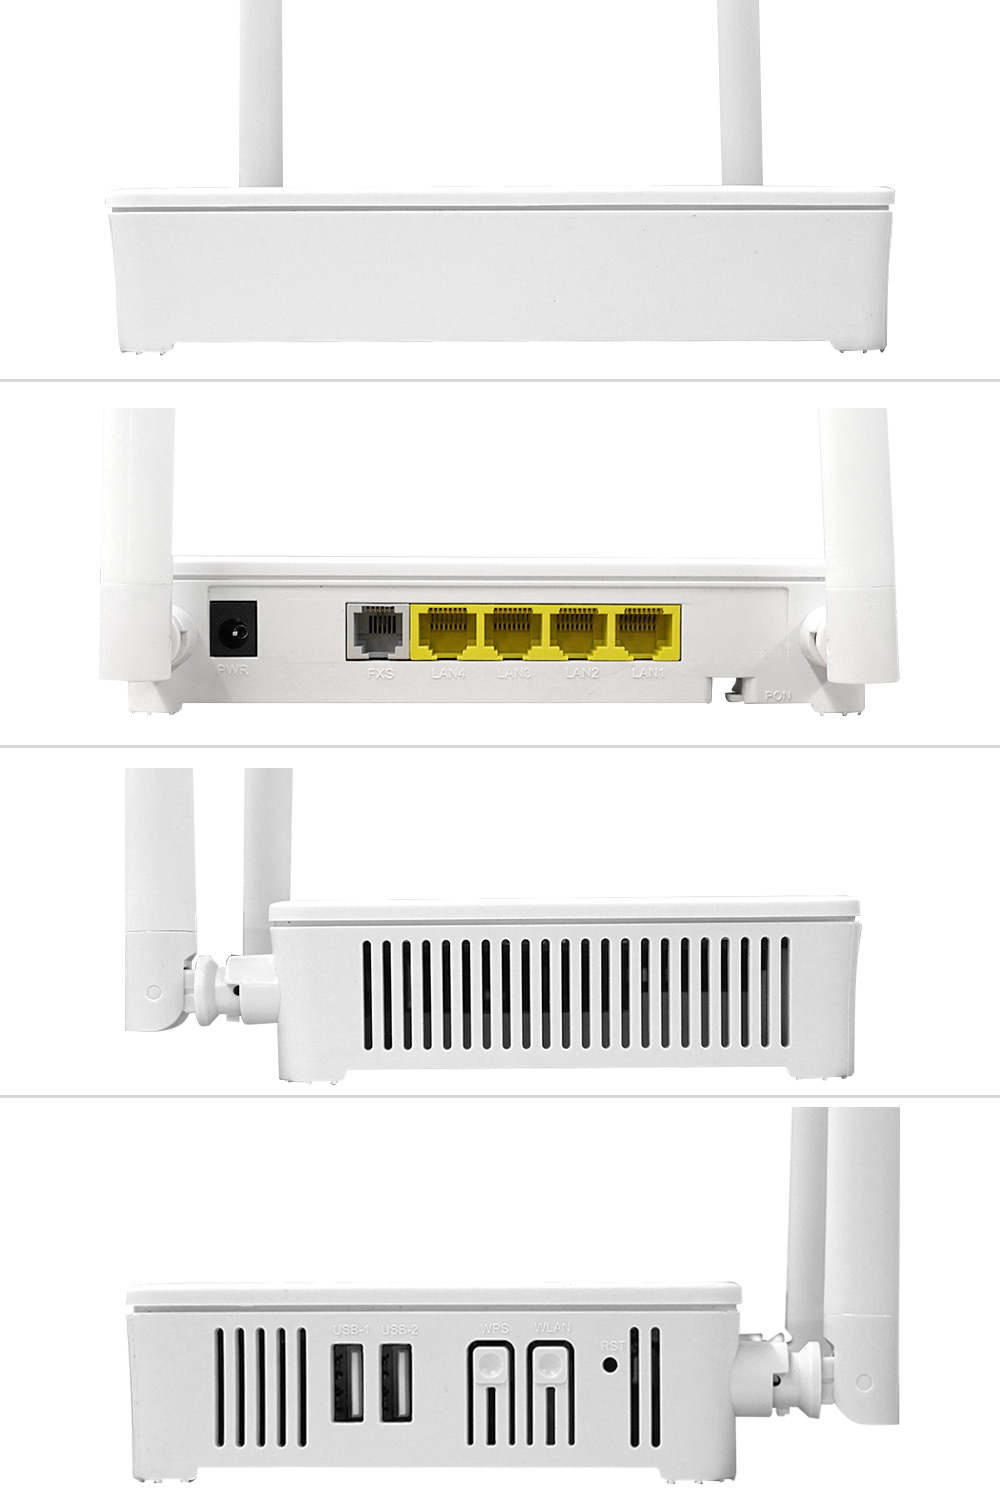 AC1200 wireless VoIP GPon router